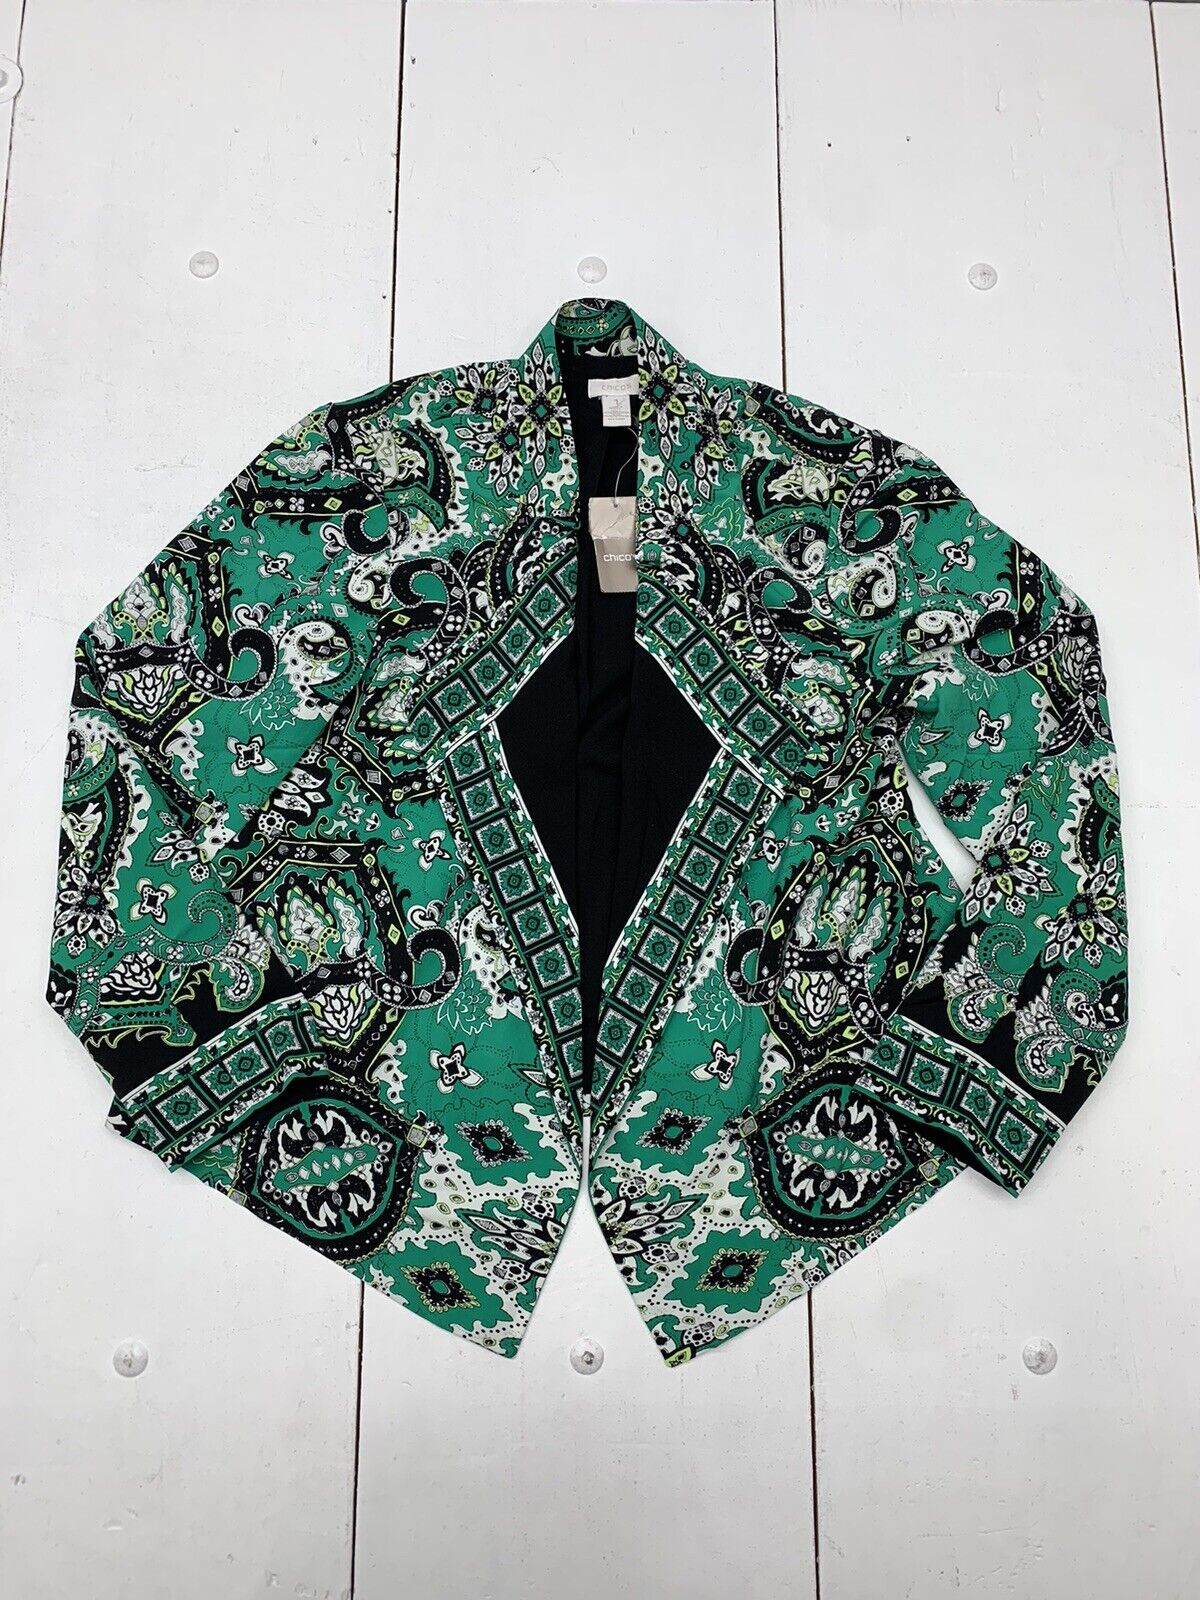 Chico's Women's Jacket Green White Paisley Open Front Long Sleeve Size 1 US